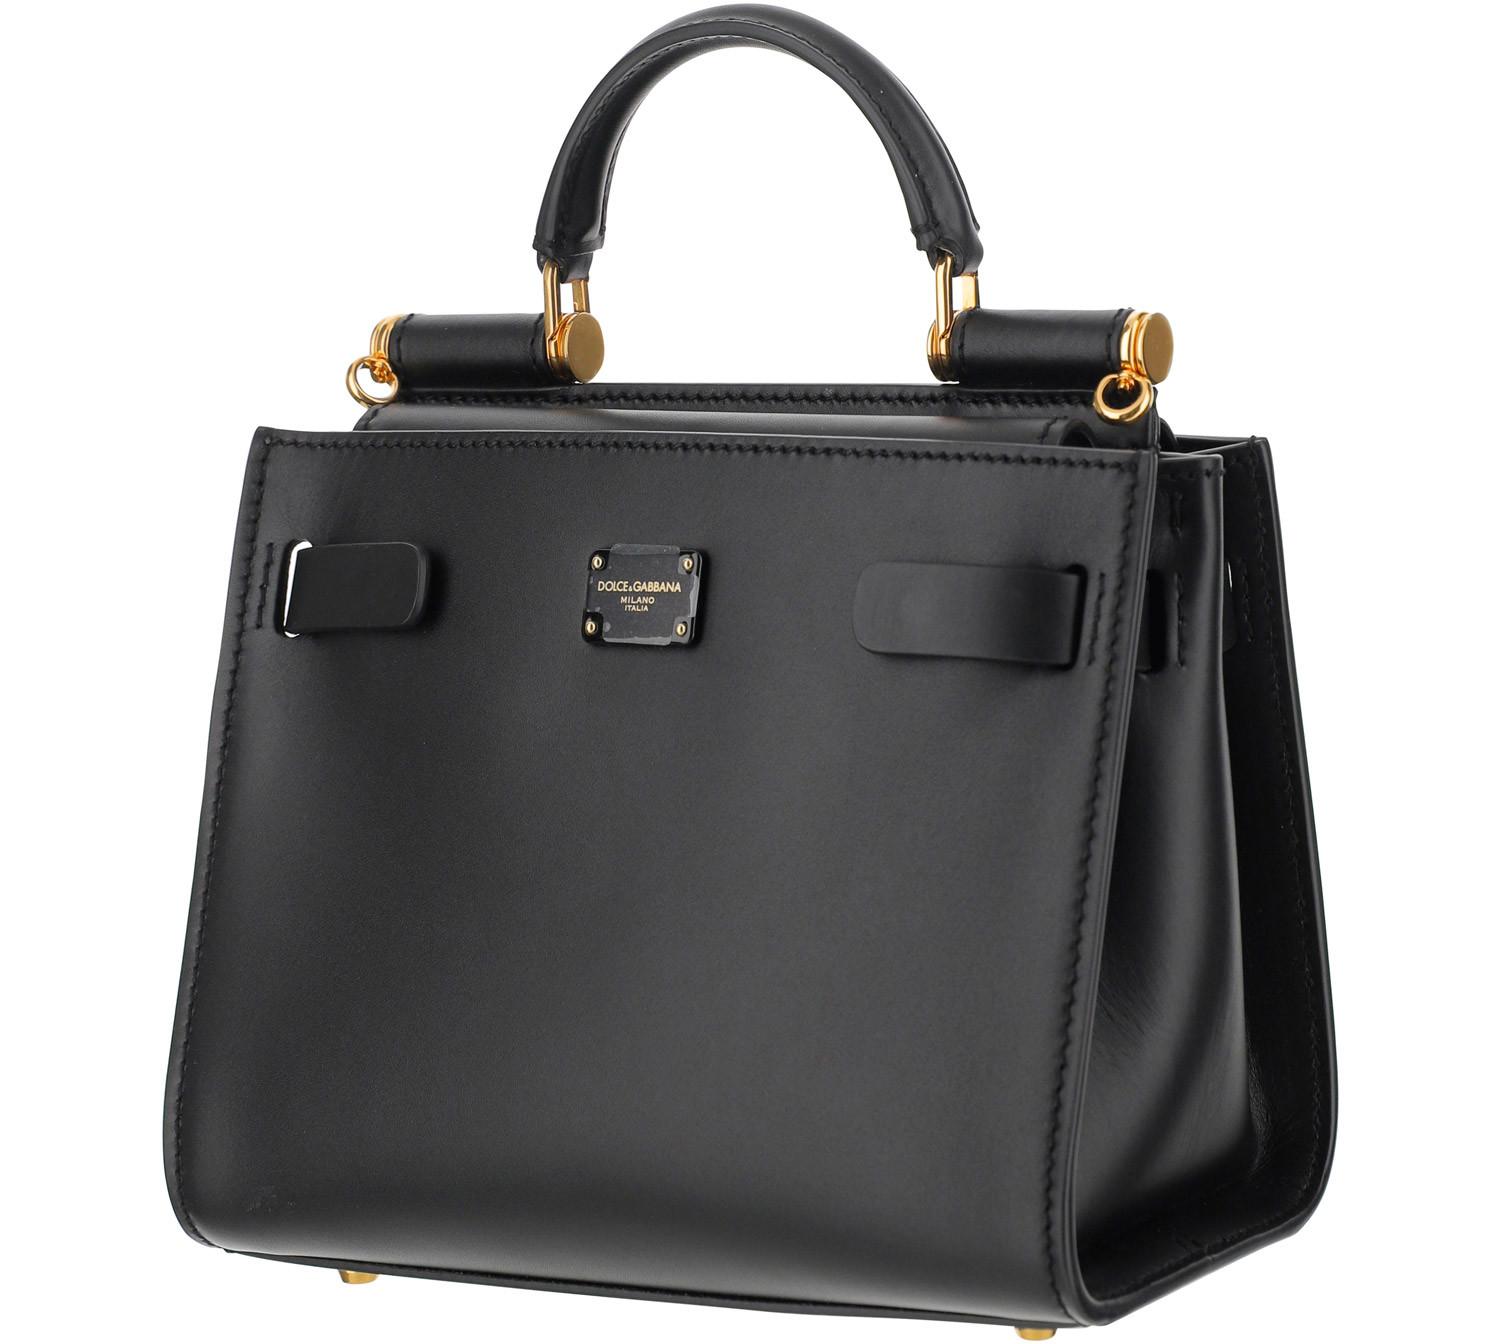 New Dolce & Gabbana Sicily 62 tote leather